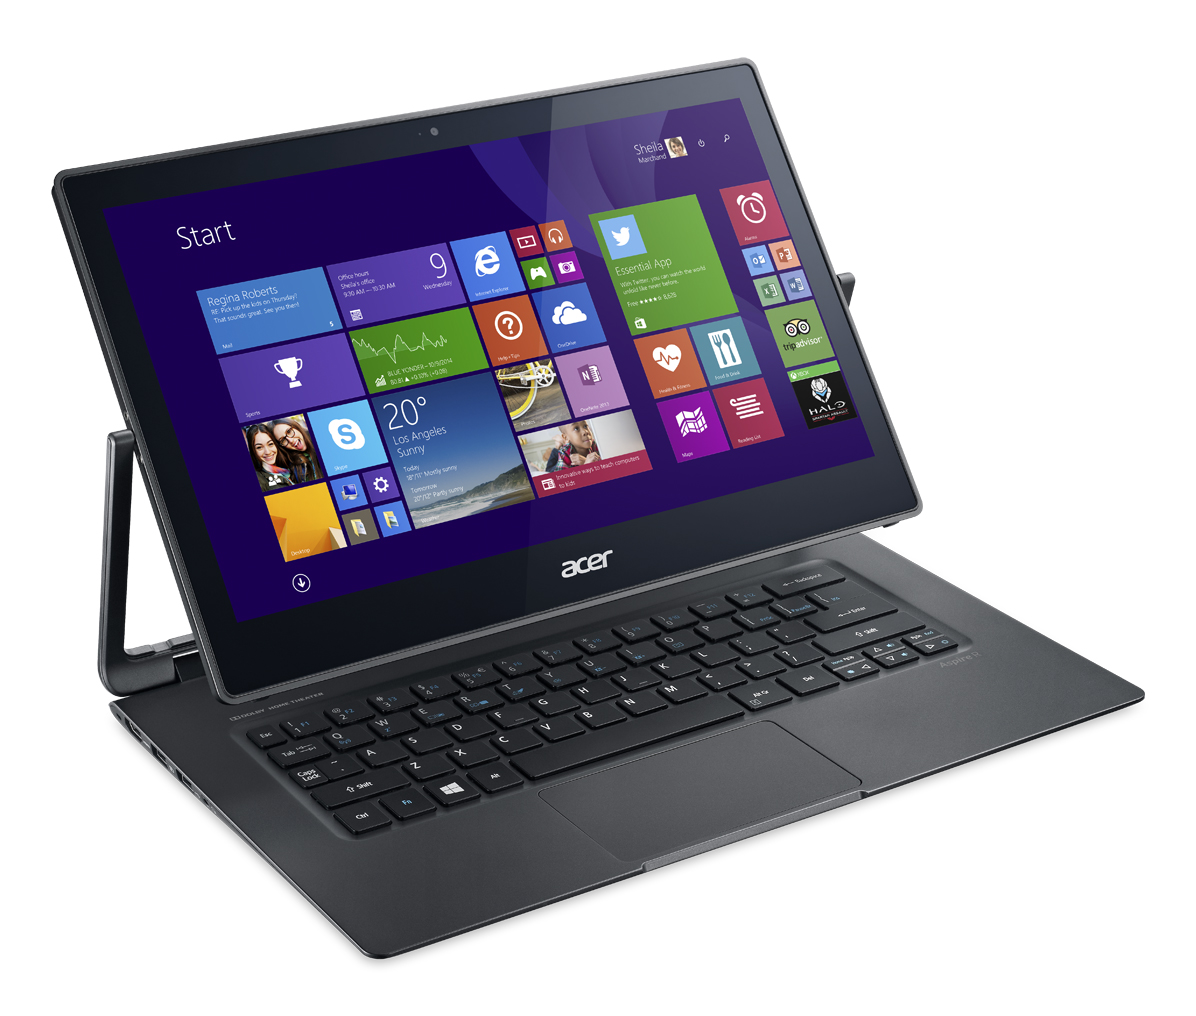 Brand new Windows 8.1 devices innovate and impress at IFA 2014